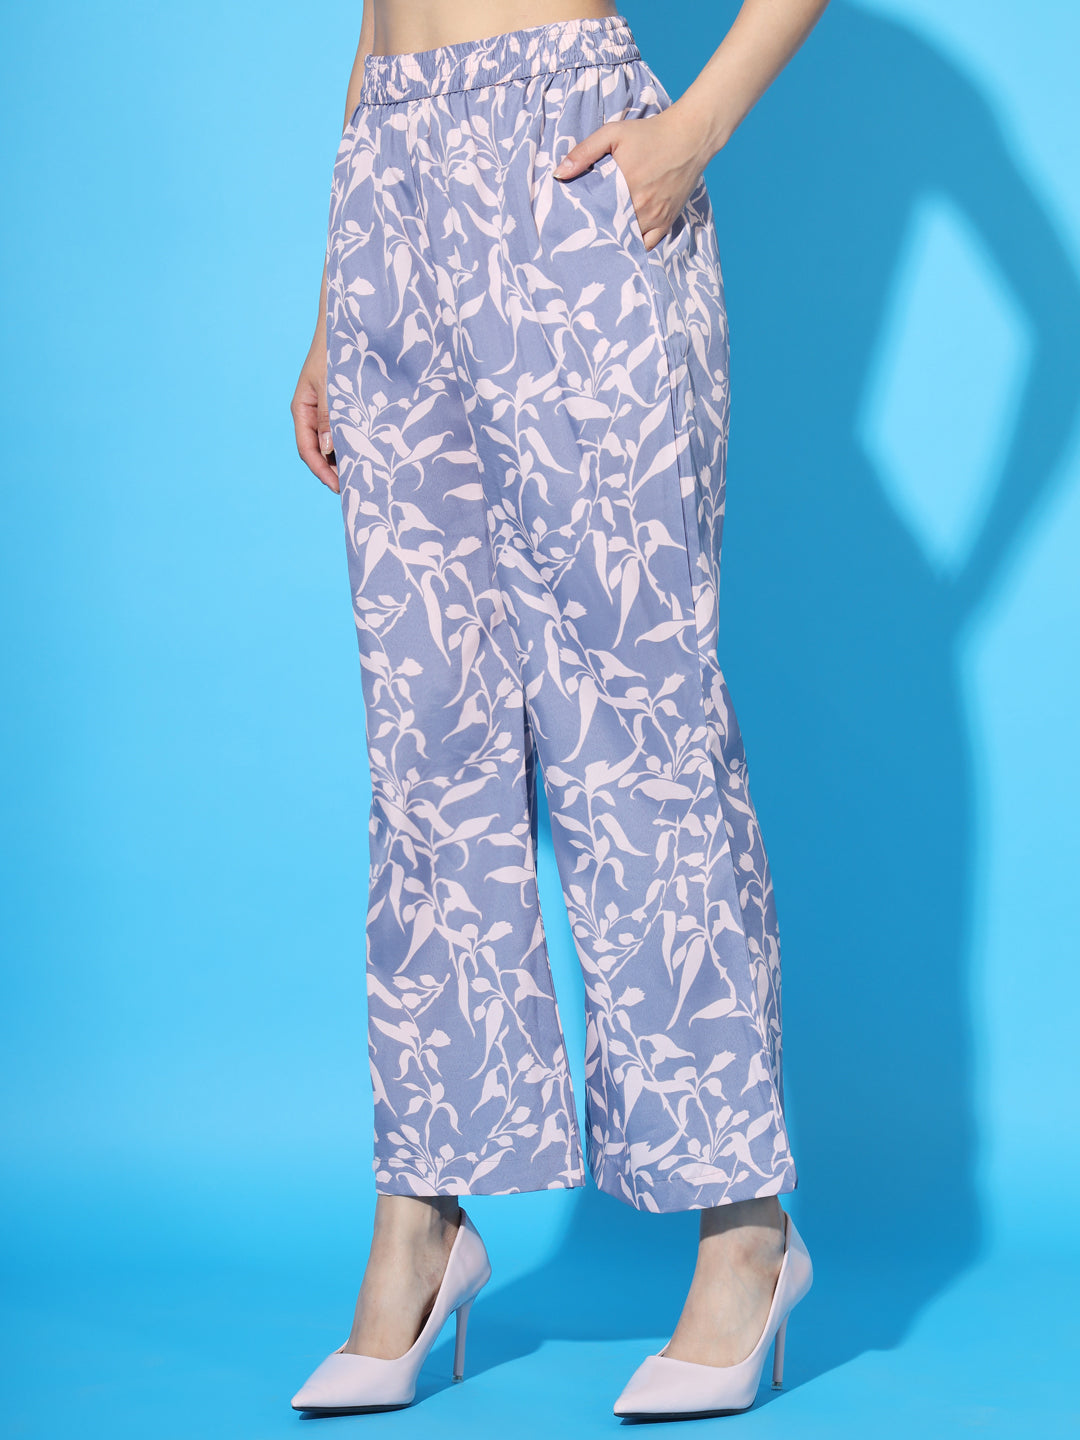 Women's Top with Pant Botnical Printed Co-ord Set